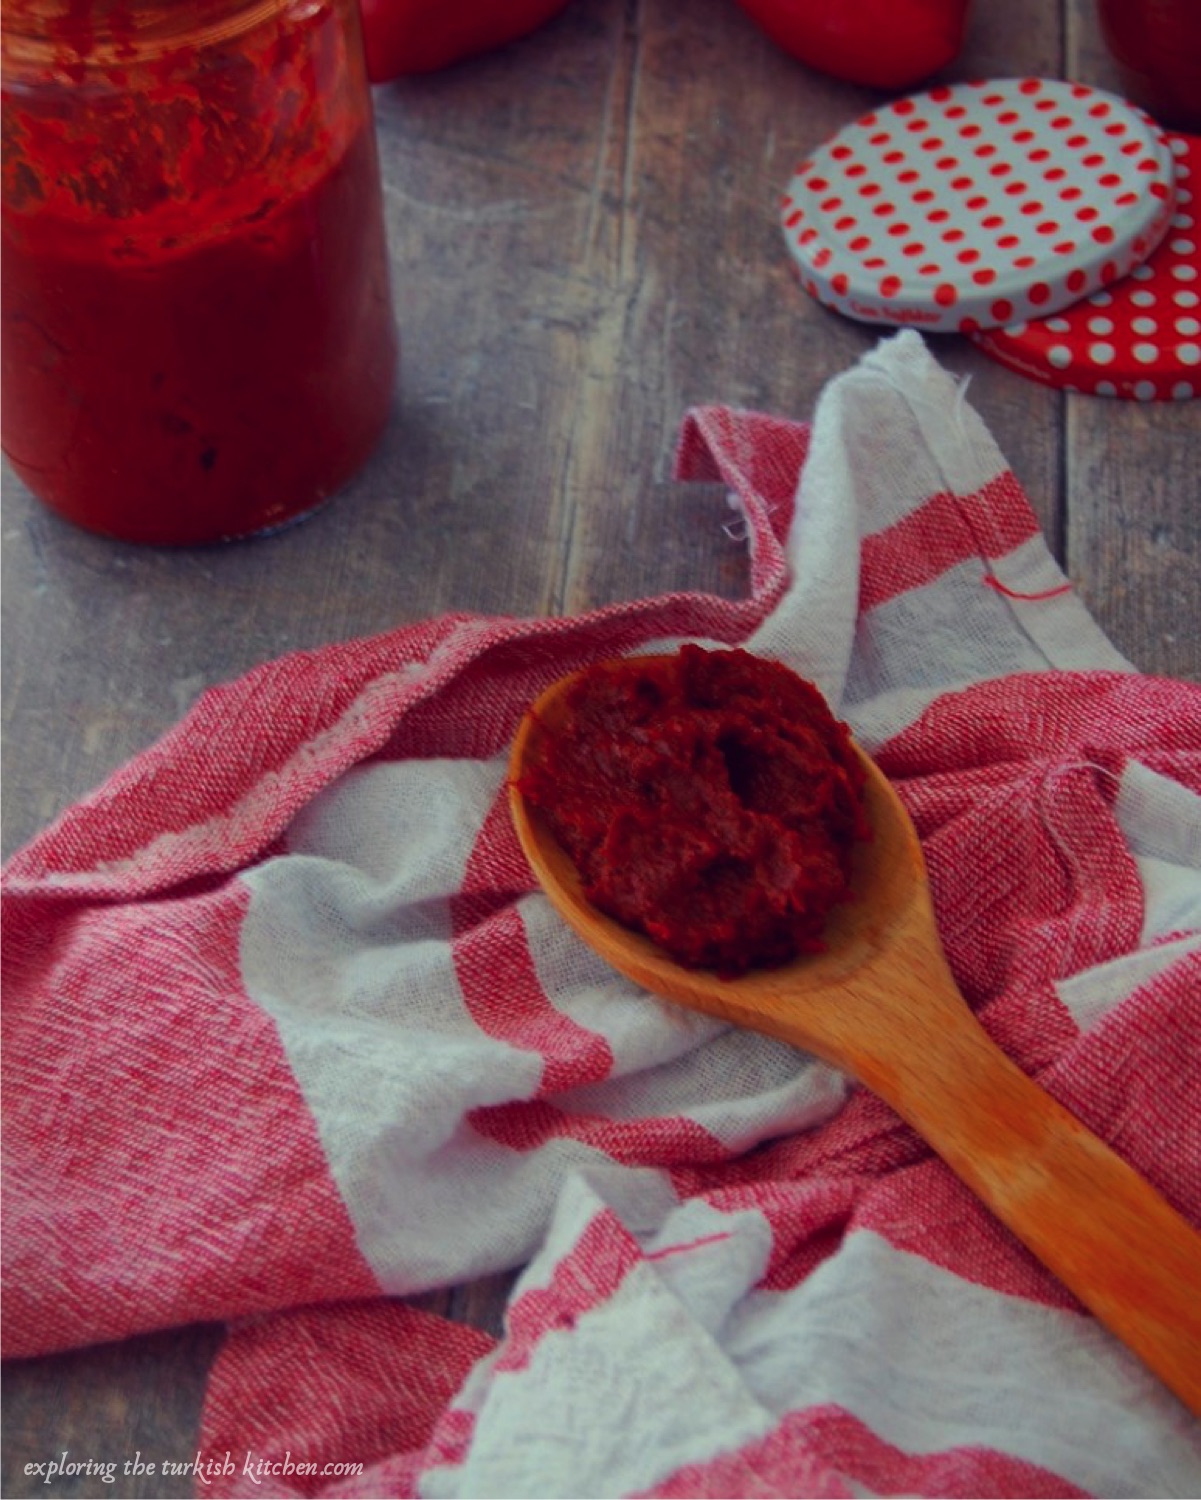 Large wooden spoon with Turkish sundried red pepper paste lays on a red and white teatowel. A half filled jar and red polka dot lid set the scene.